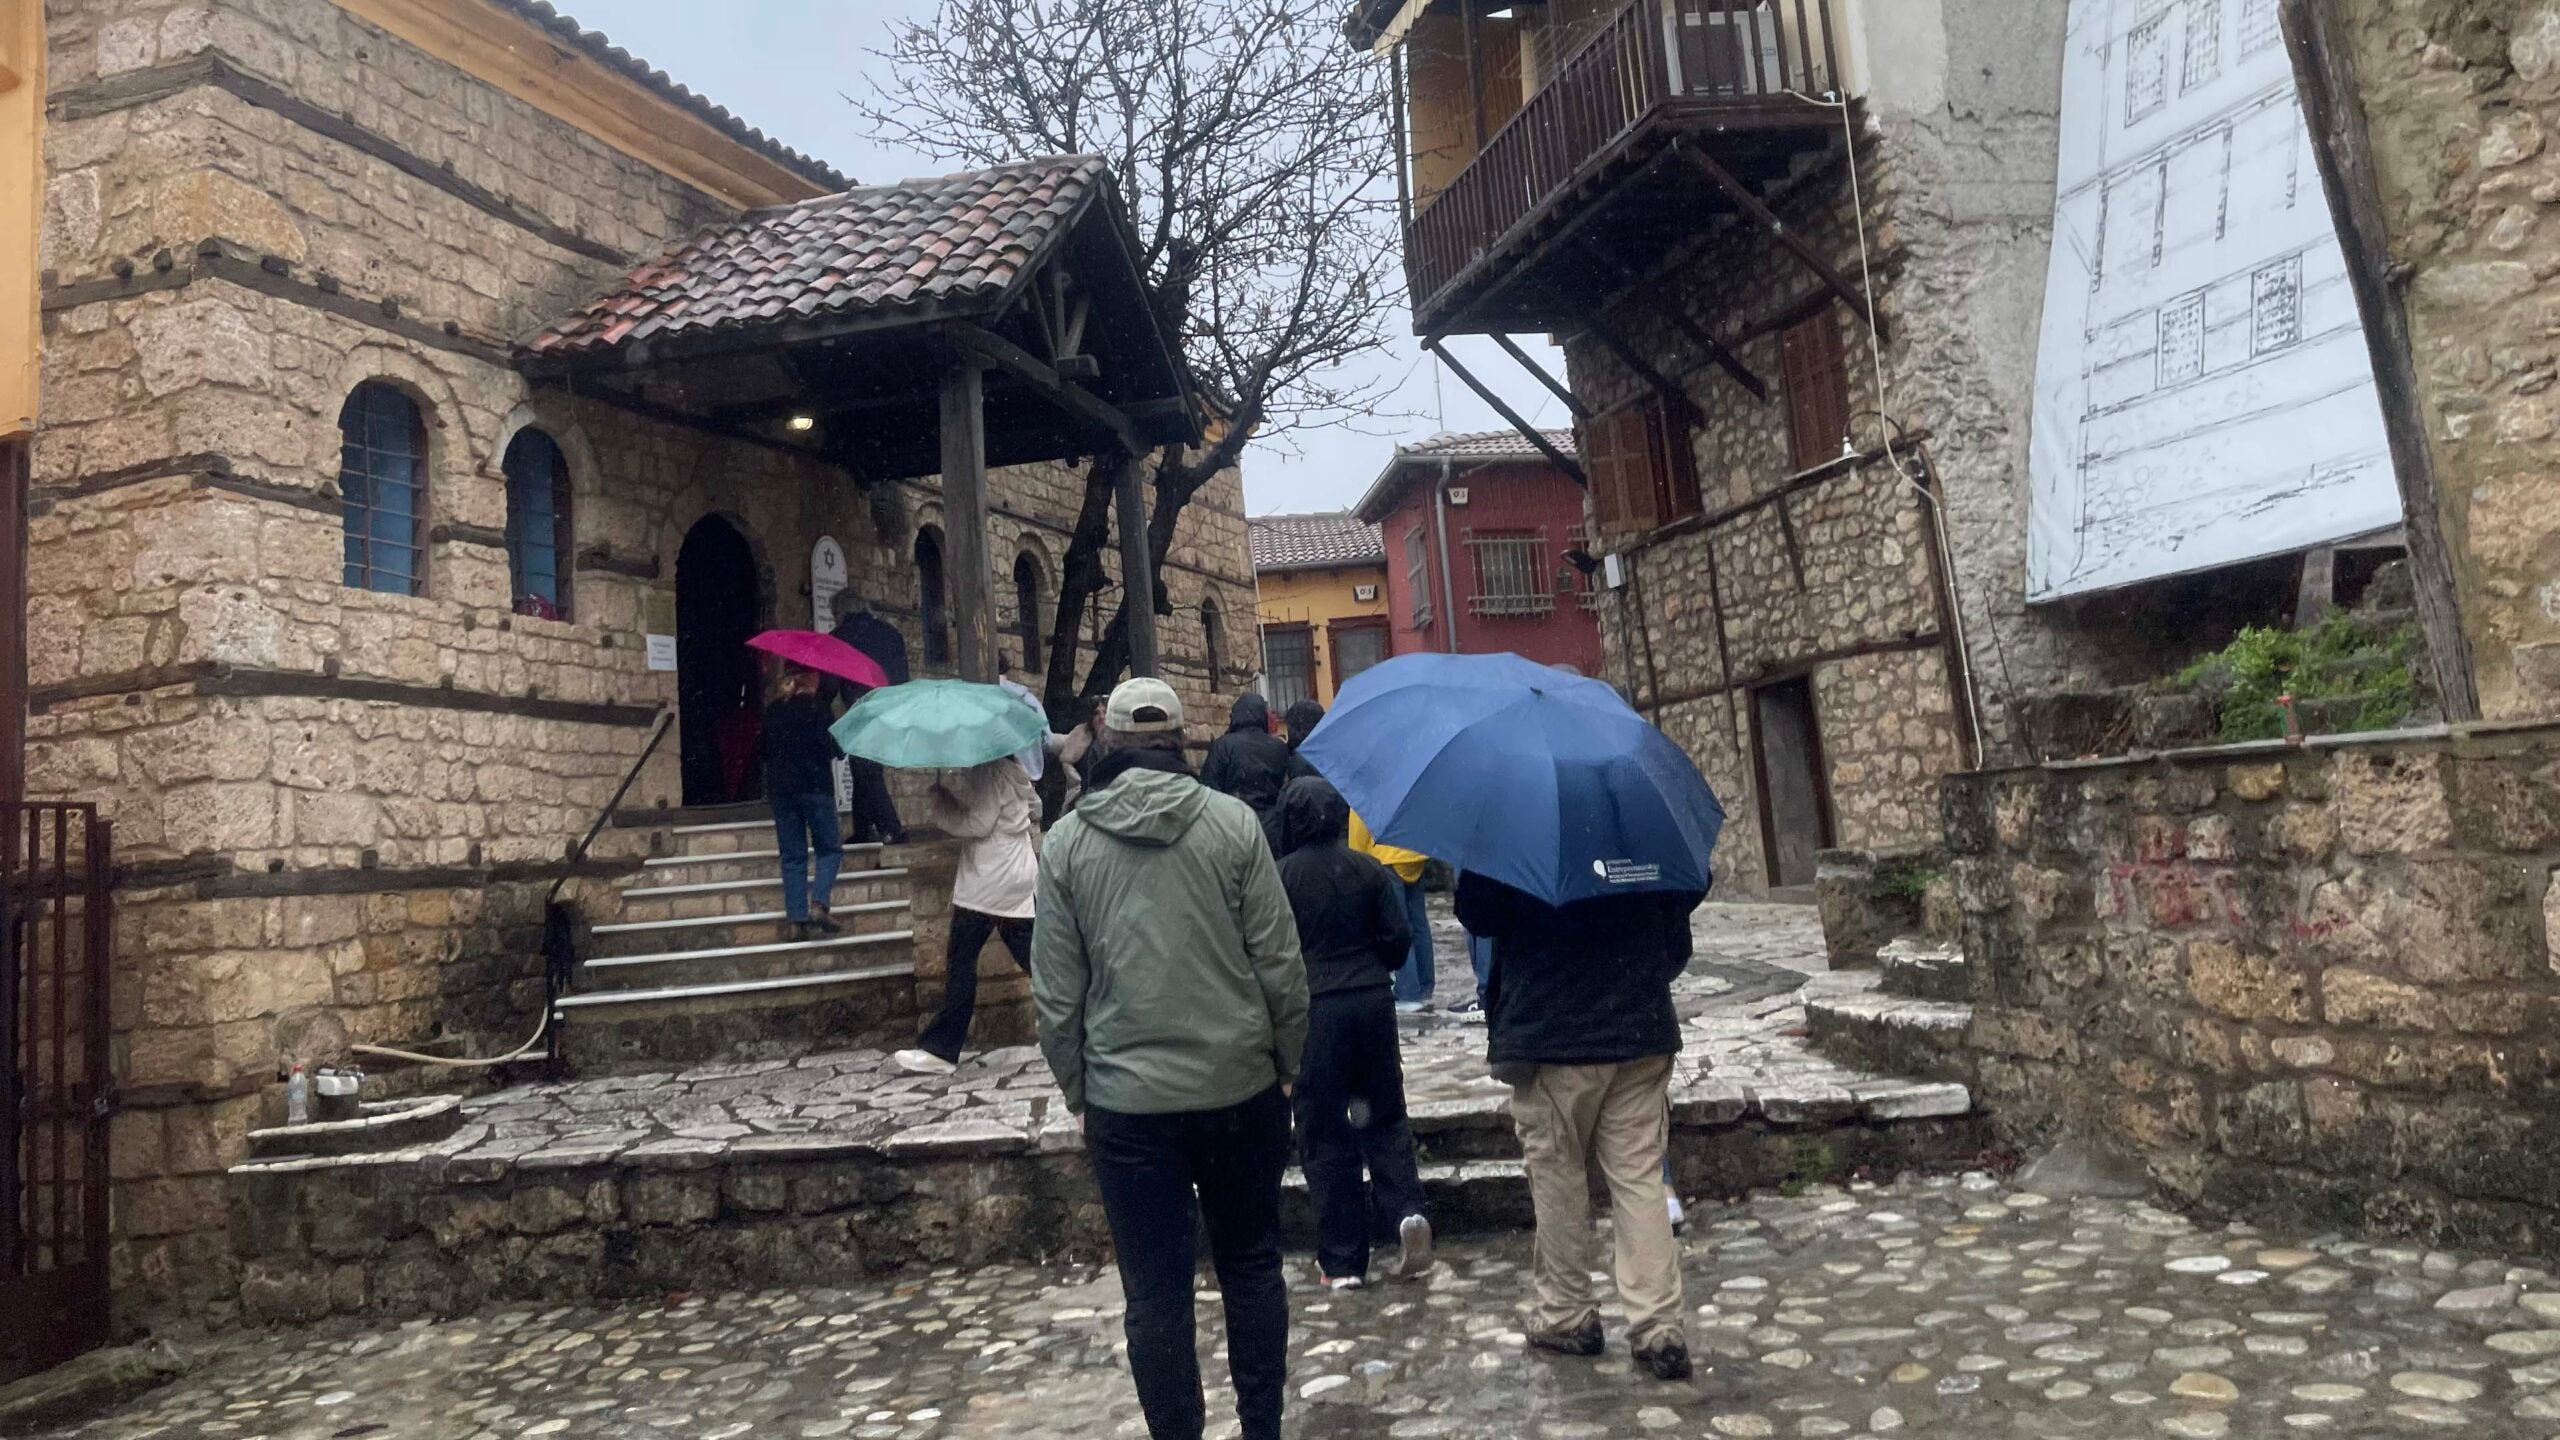 People, carrying umbrellas heading into a synagogue.